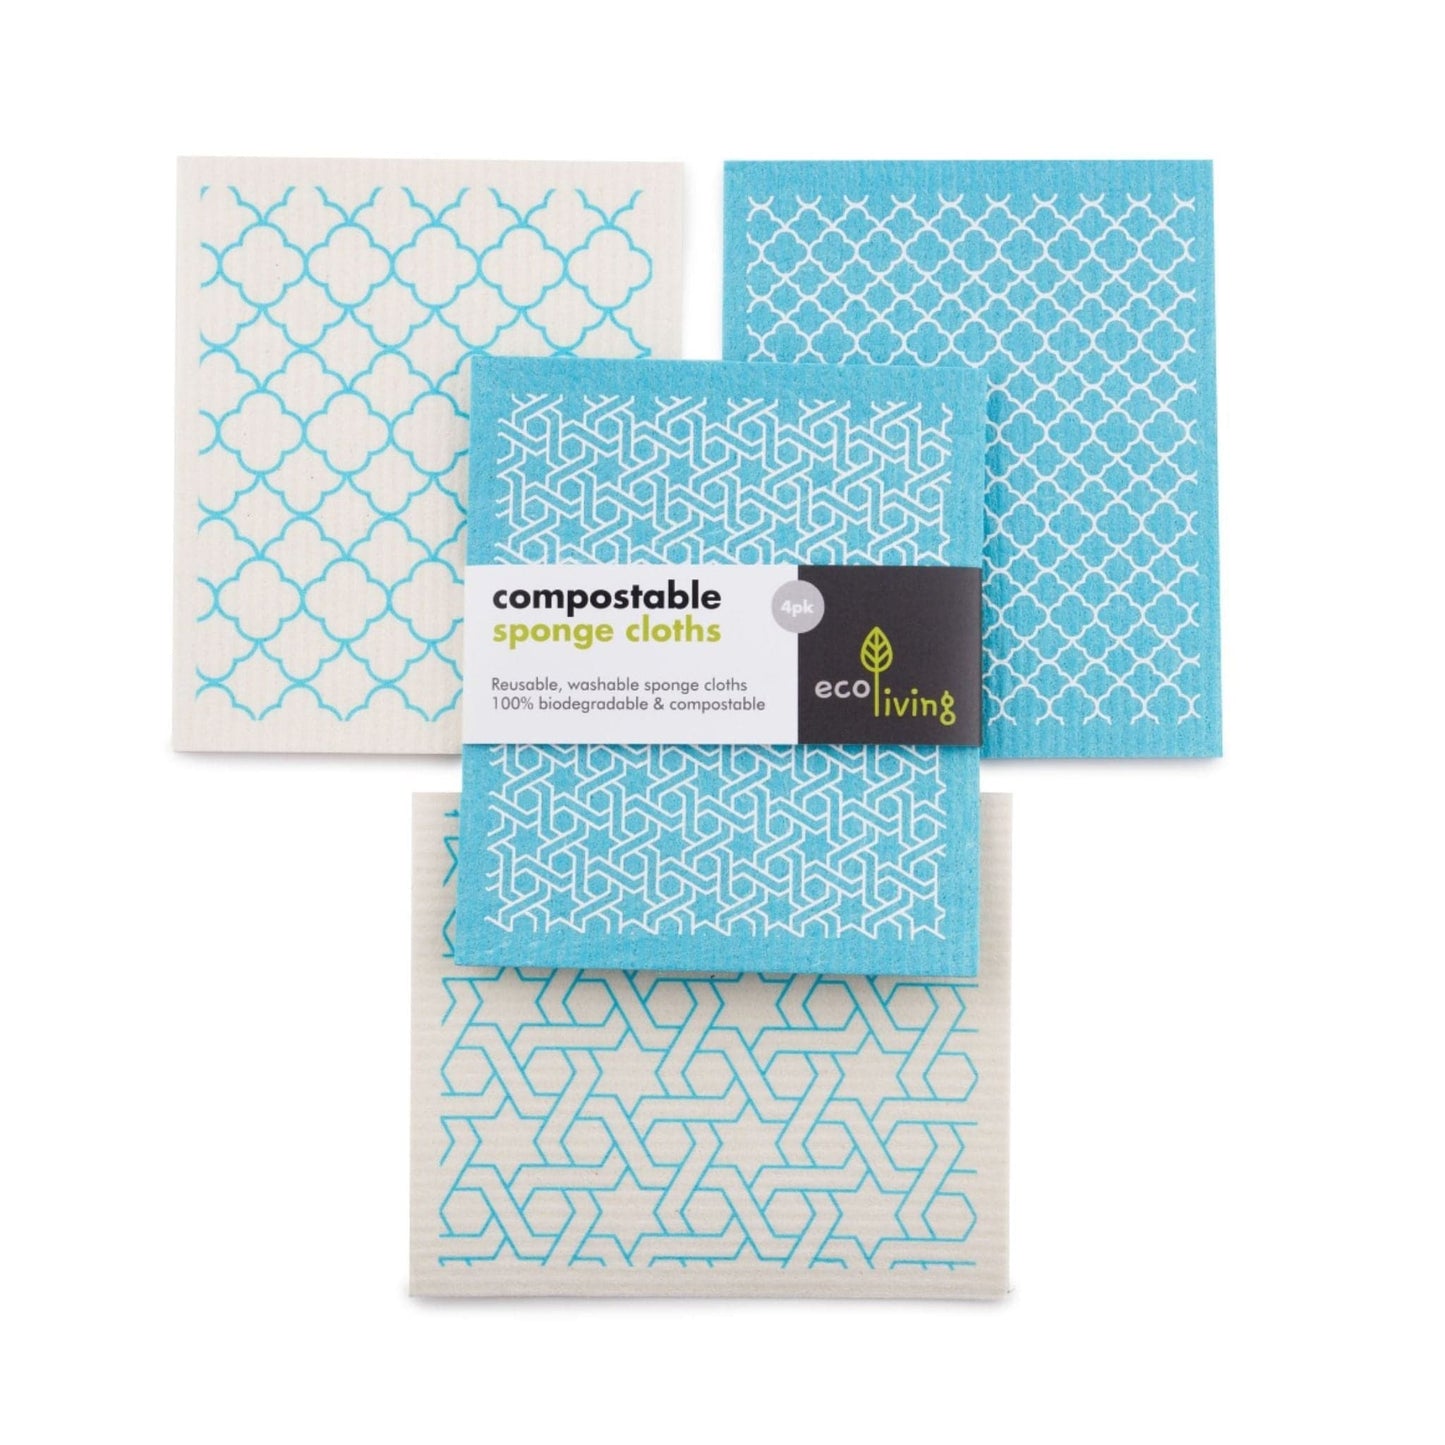 ecoLiving Cloths Moroccan Compostable Sponge Cleaning Cloths - Illustrated (4 Pack)